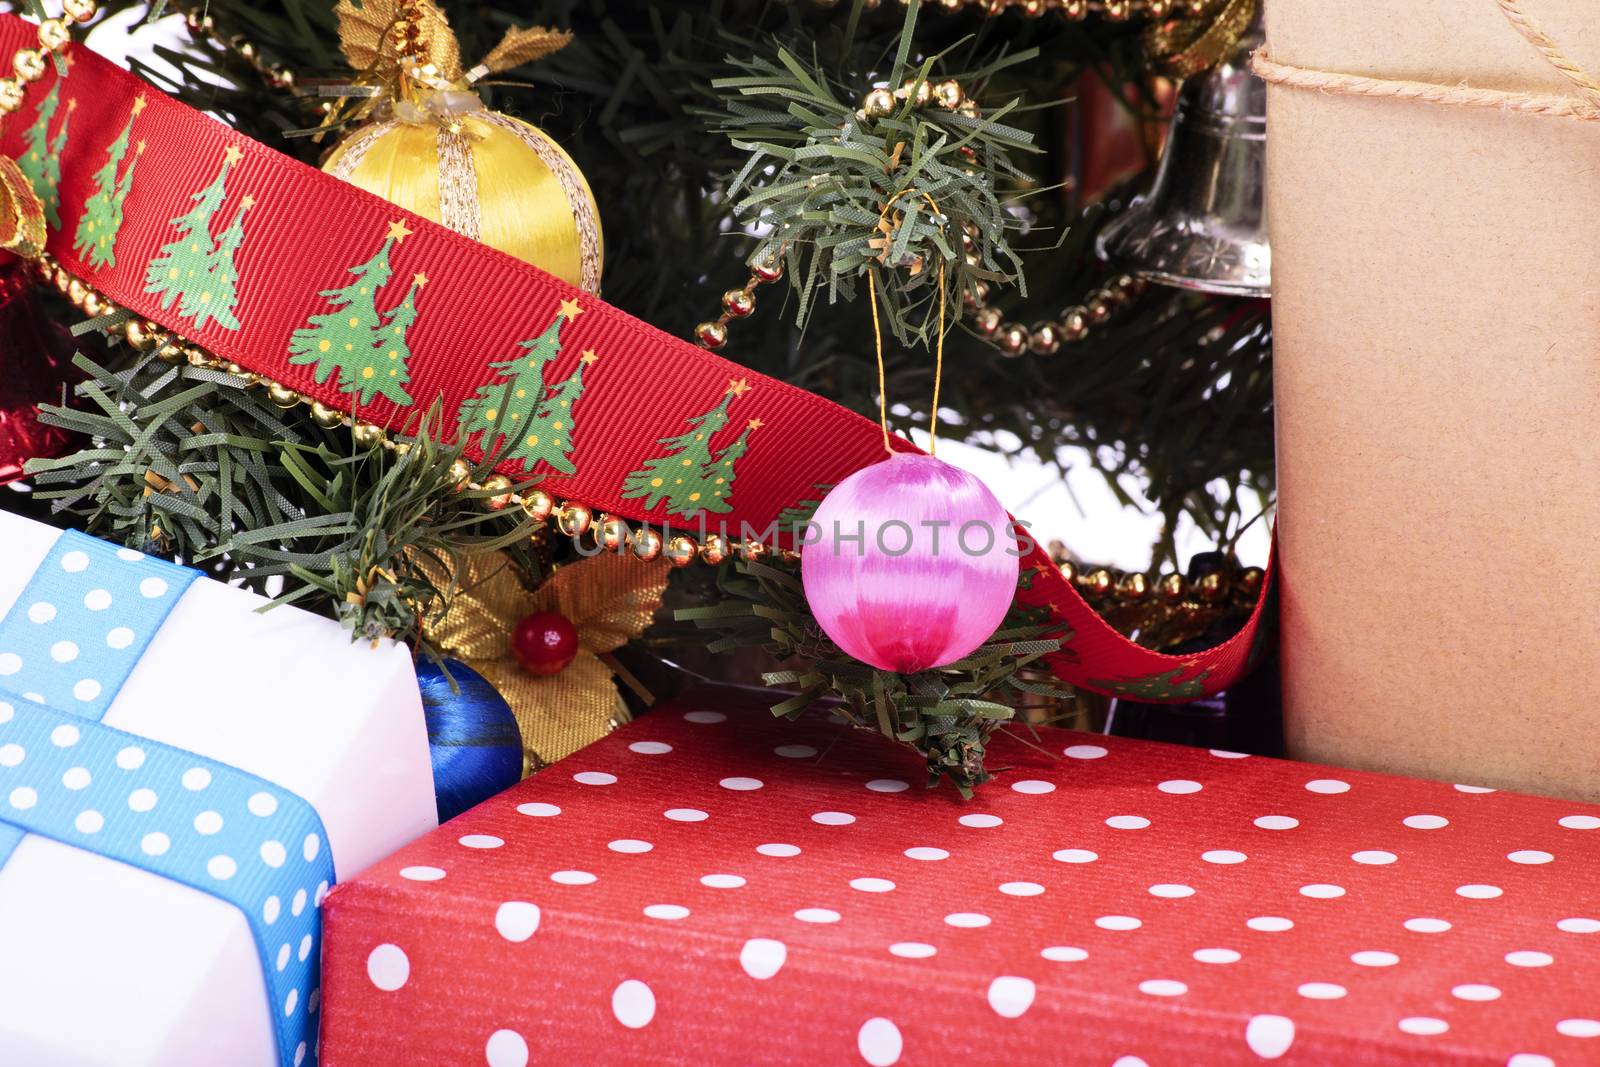 A close up shot of Christmas tree with decorations, ornaments and presents.